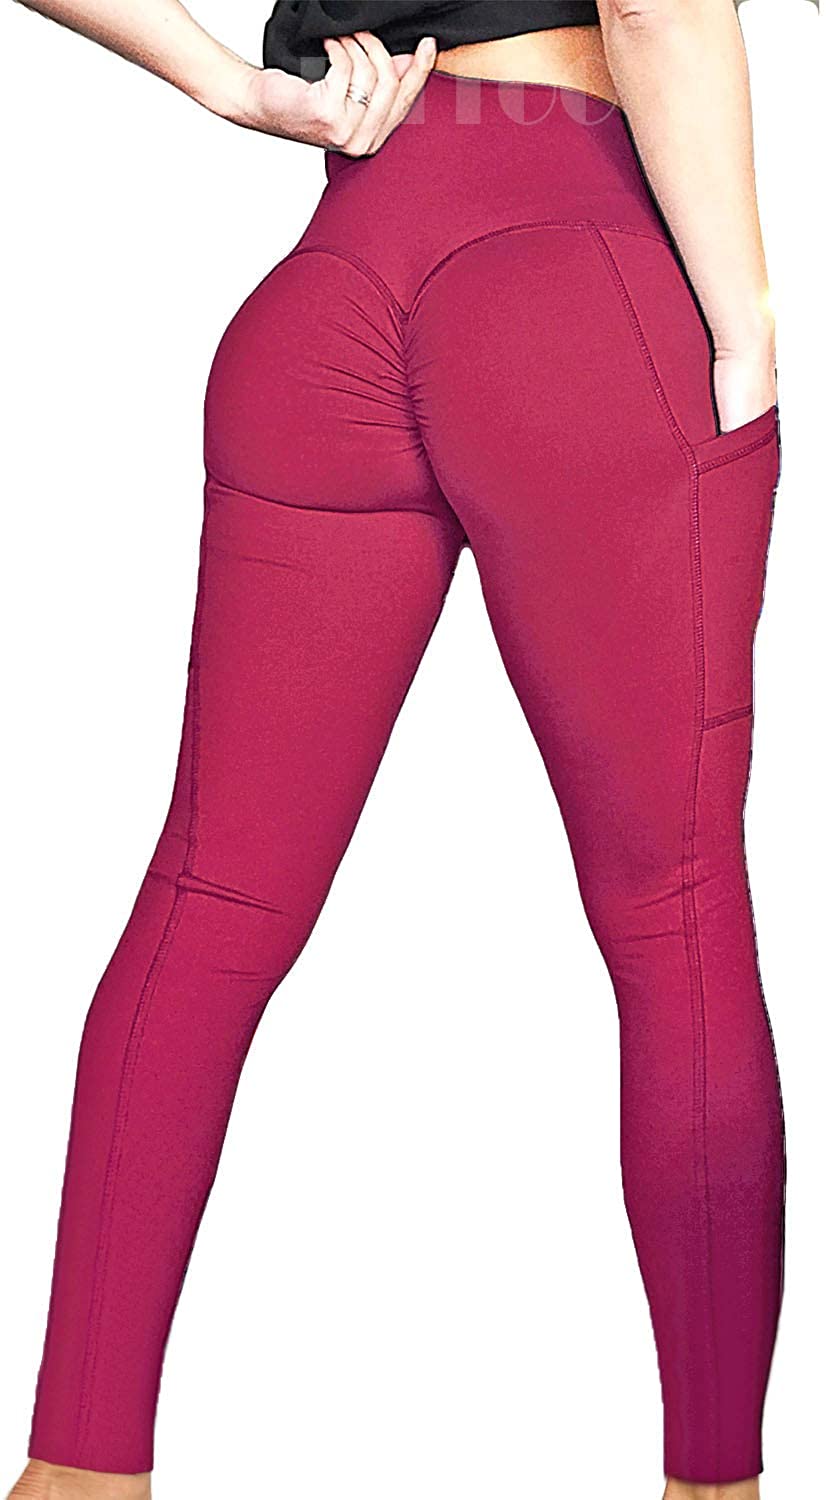 Amtdh Womens Yoga Pants for Women Sweatpants High Waist Butt Lift Tights  Workout Pants Stretch Athletic Workout Pants Slimming Tummy Control Fitness  Running Yoga Leggings for Women Pink S 